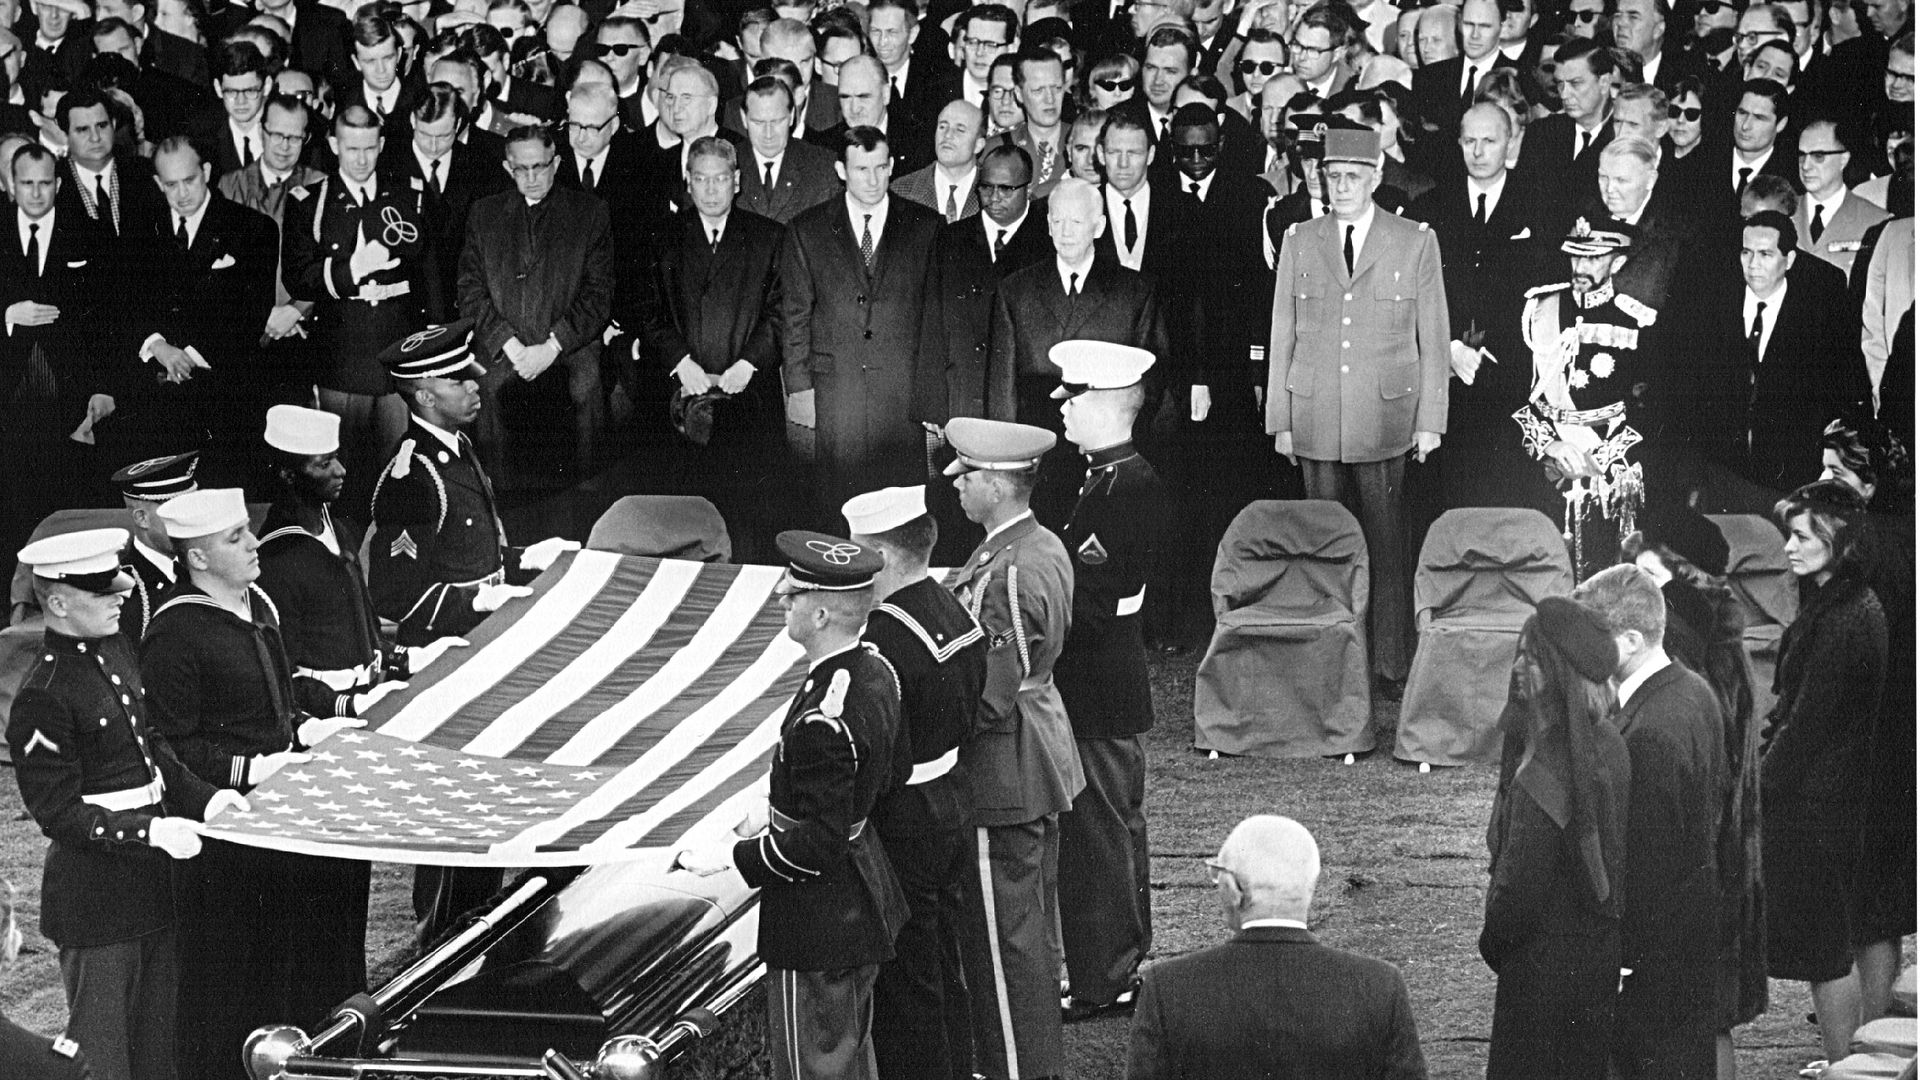 Honor guard place a flag over the casket of President John F. Kennedy during his funeral service November 25, 1963 in Arlington Cemetery